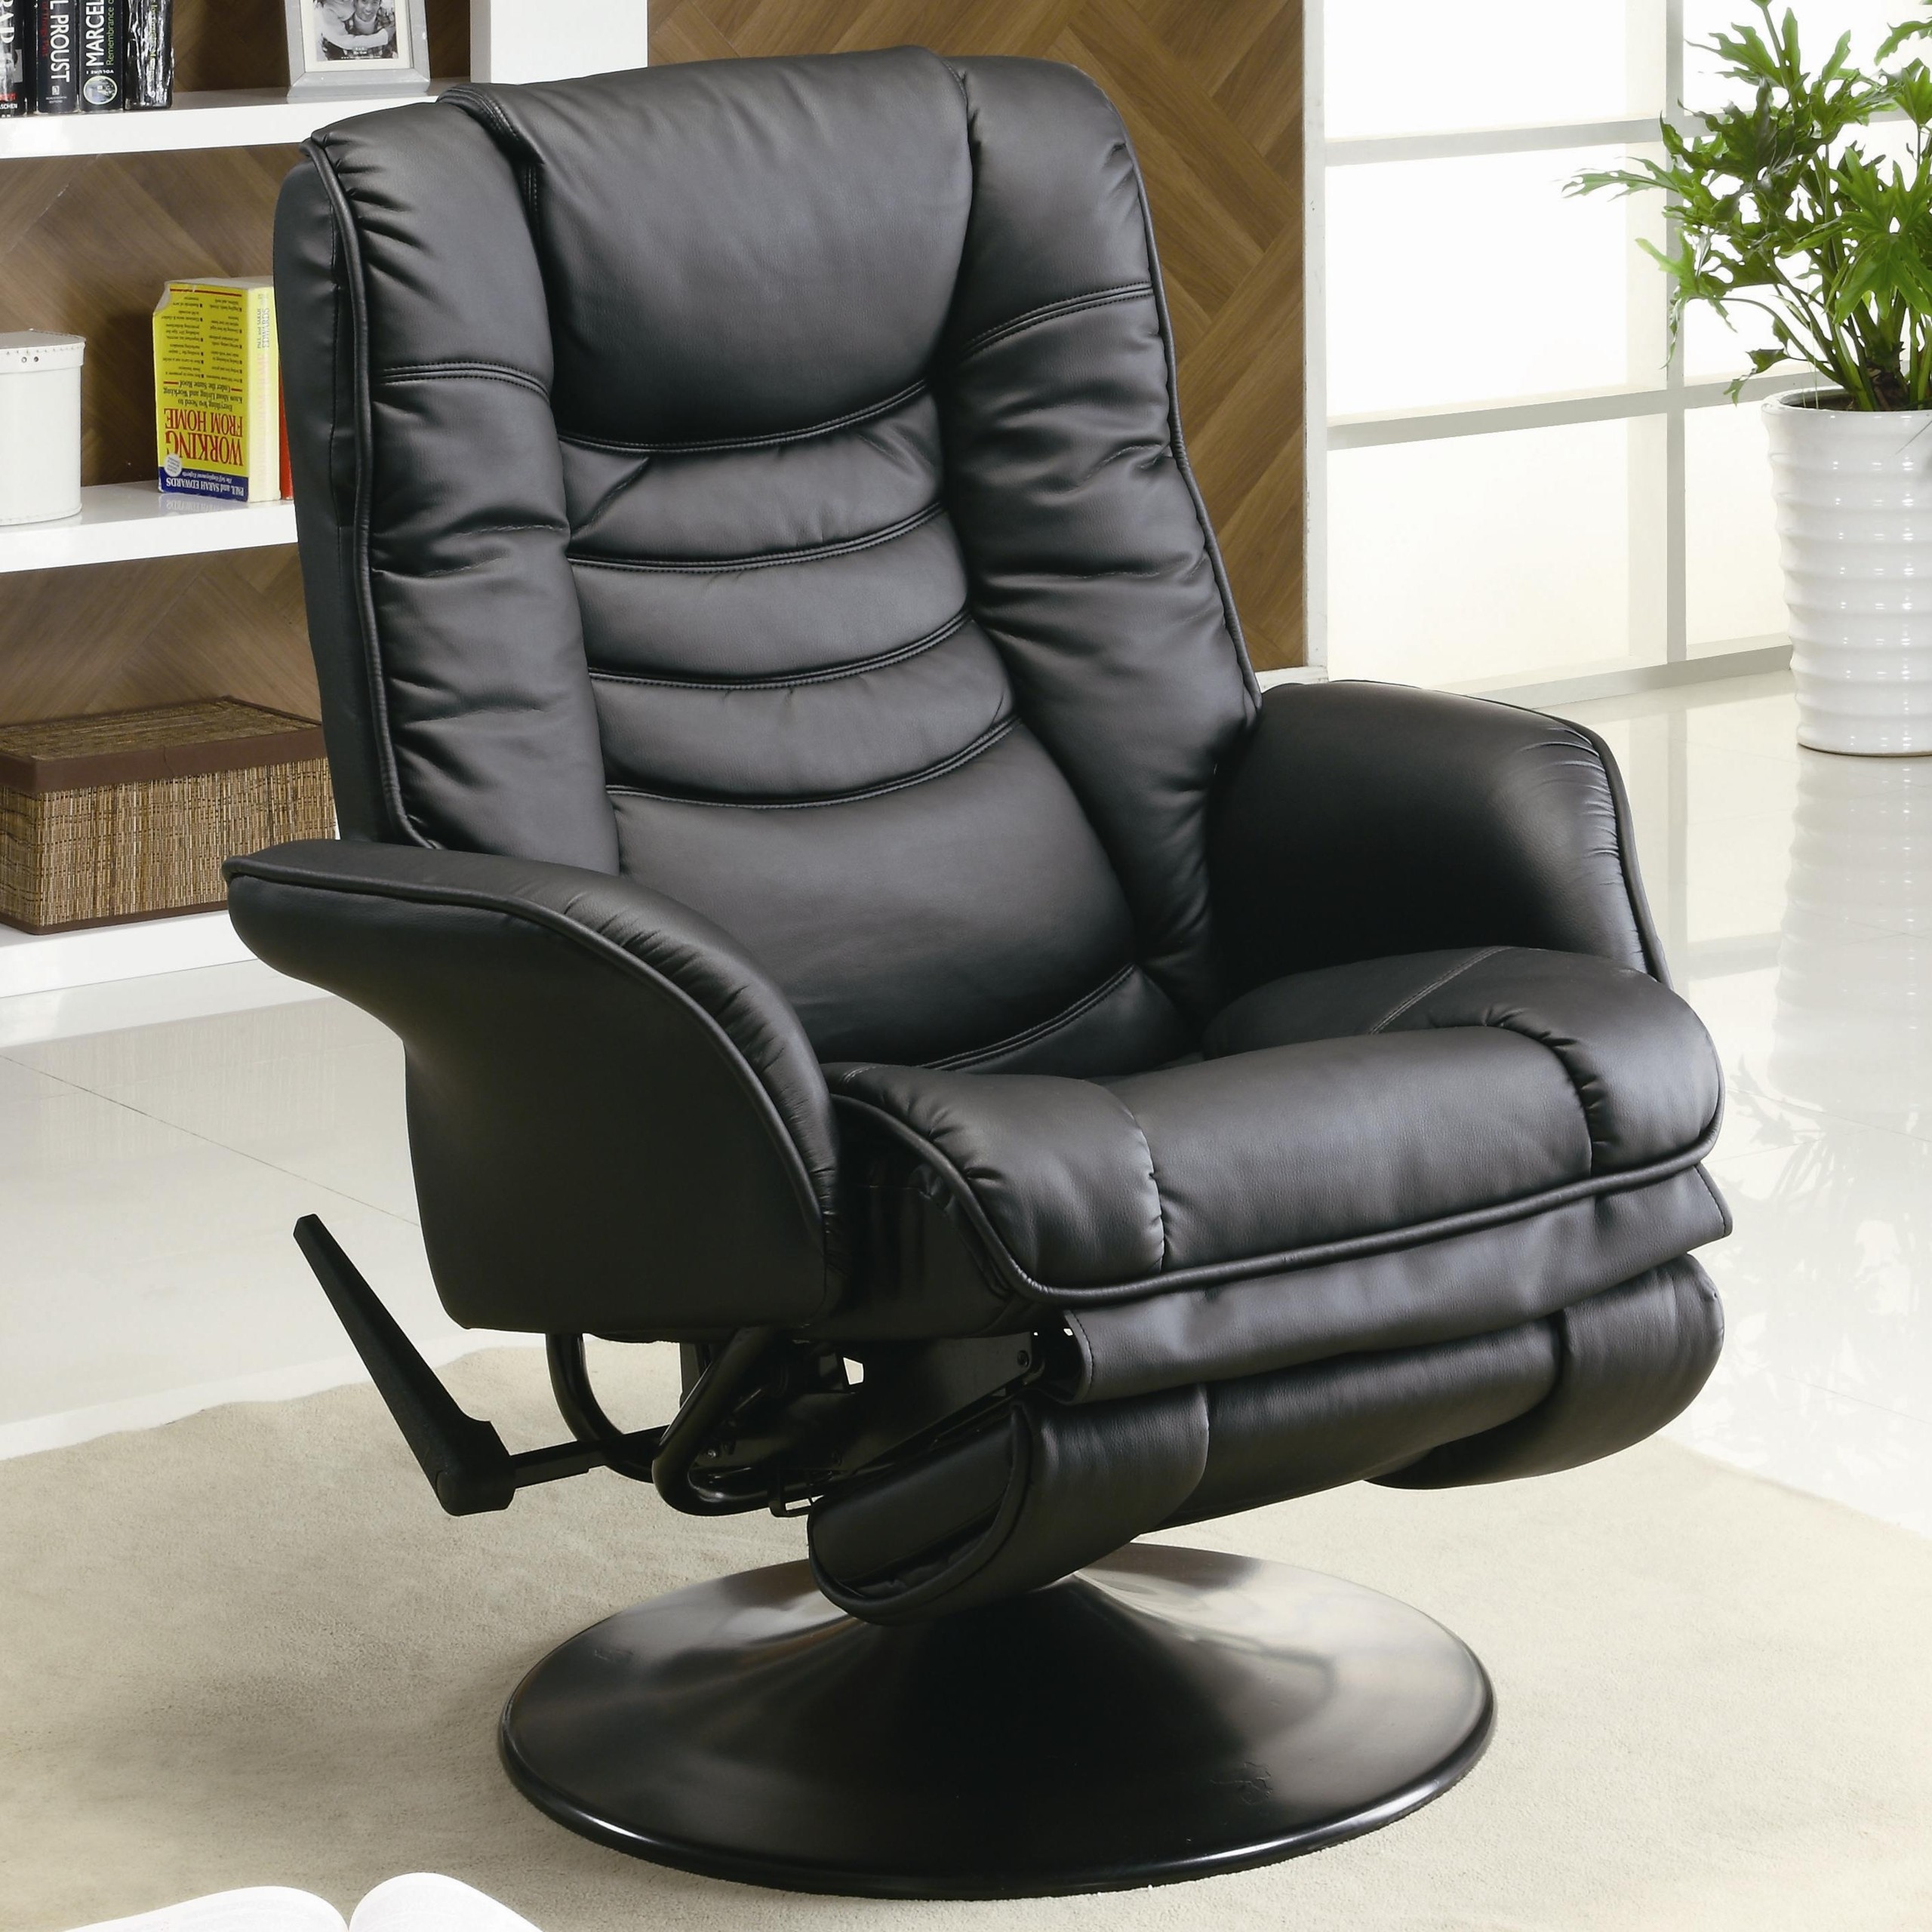 Swivel Recliner Chair with Flair Tapered Arm in Black Leatherette